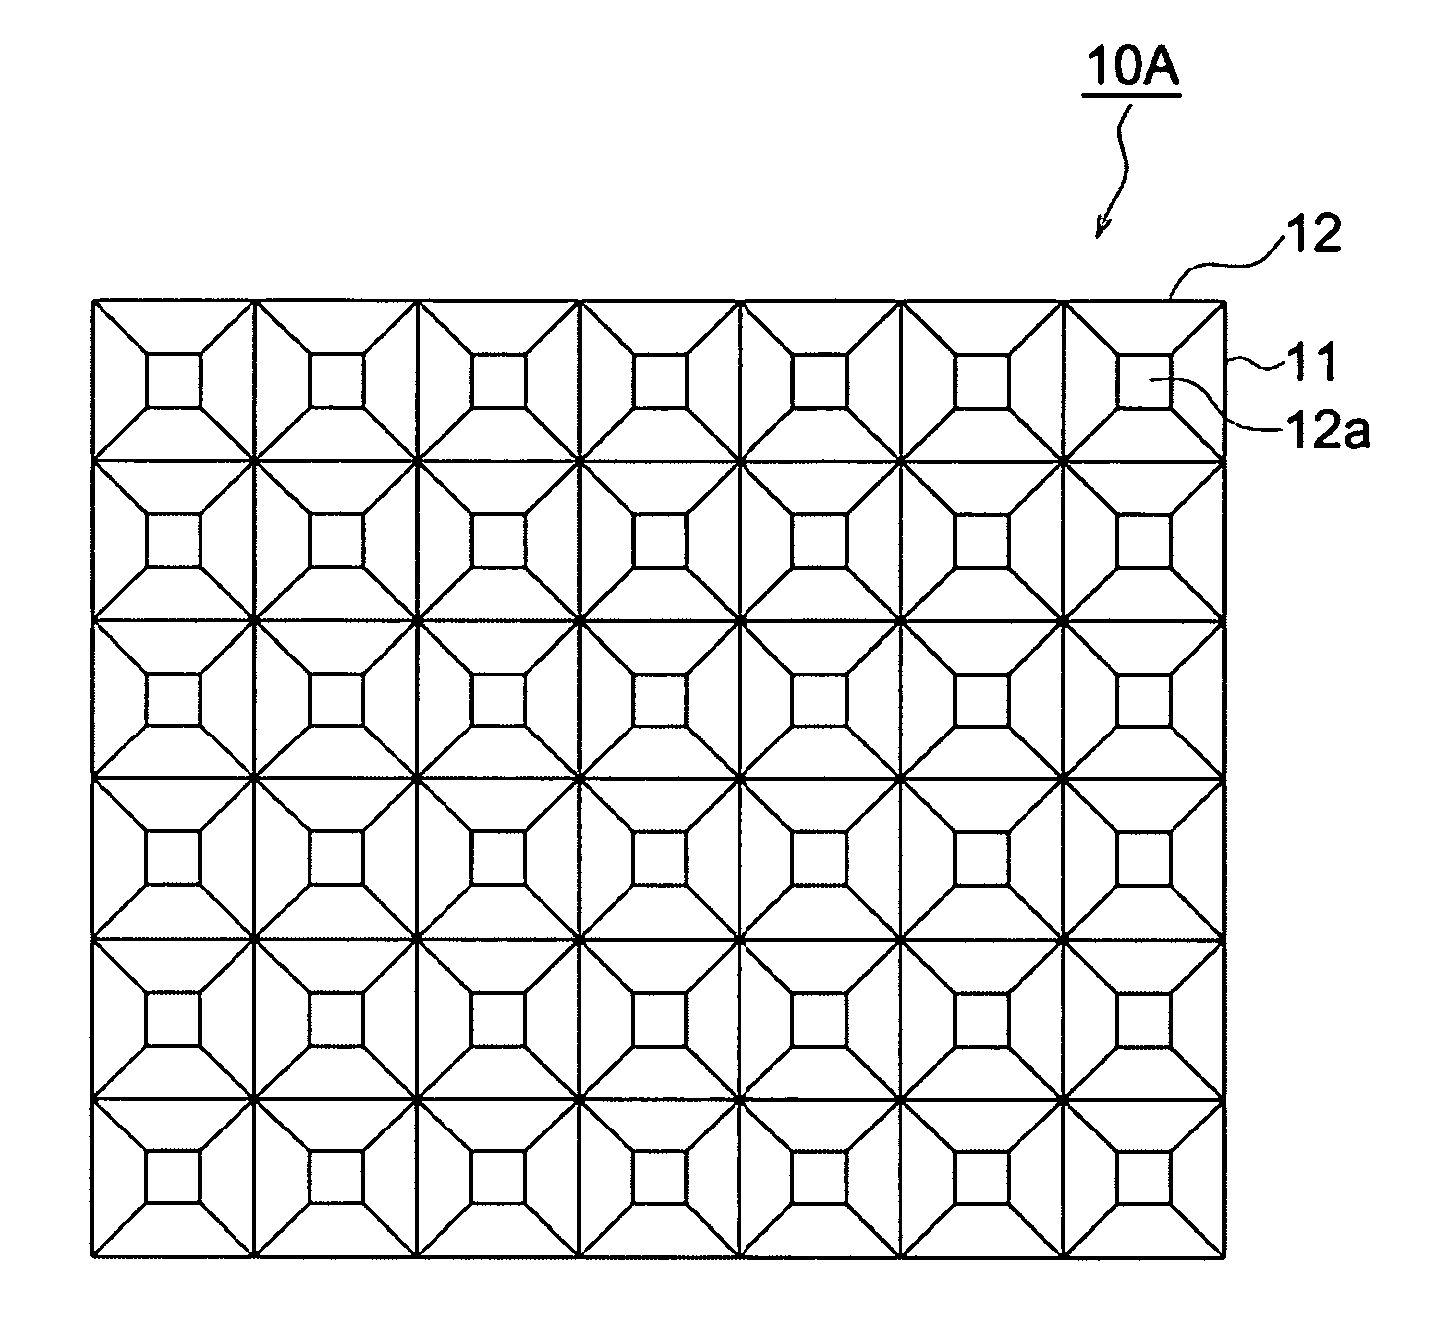 Surface luminous body, manufacturing method of the same, display device and illuminating device using the same